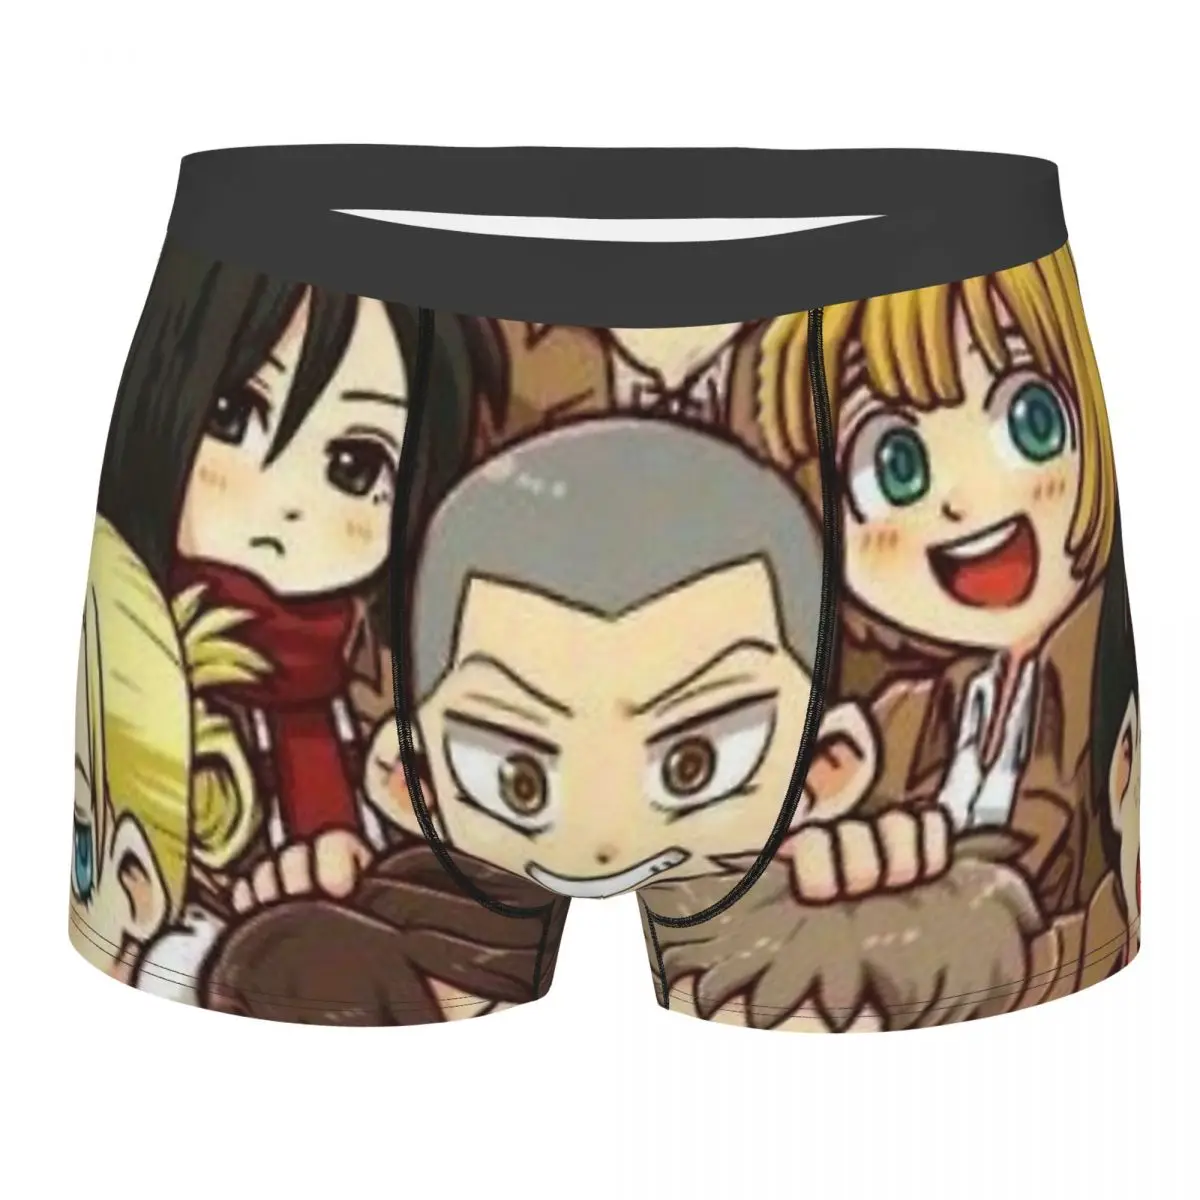 

Anime Comic Attack on Titan Characters In Cute Cartoon Style Underpants Cotton Panties Men's Underwear Sexy Shorts Boxer Briefs